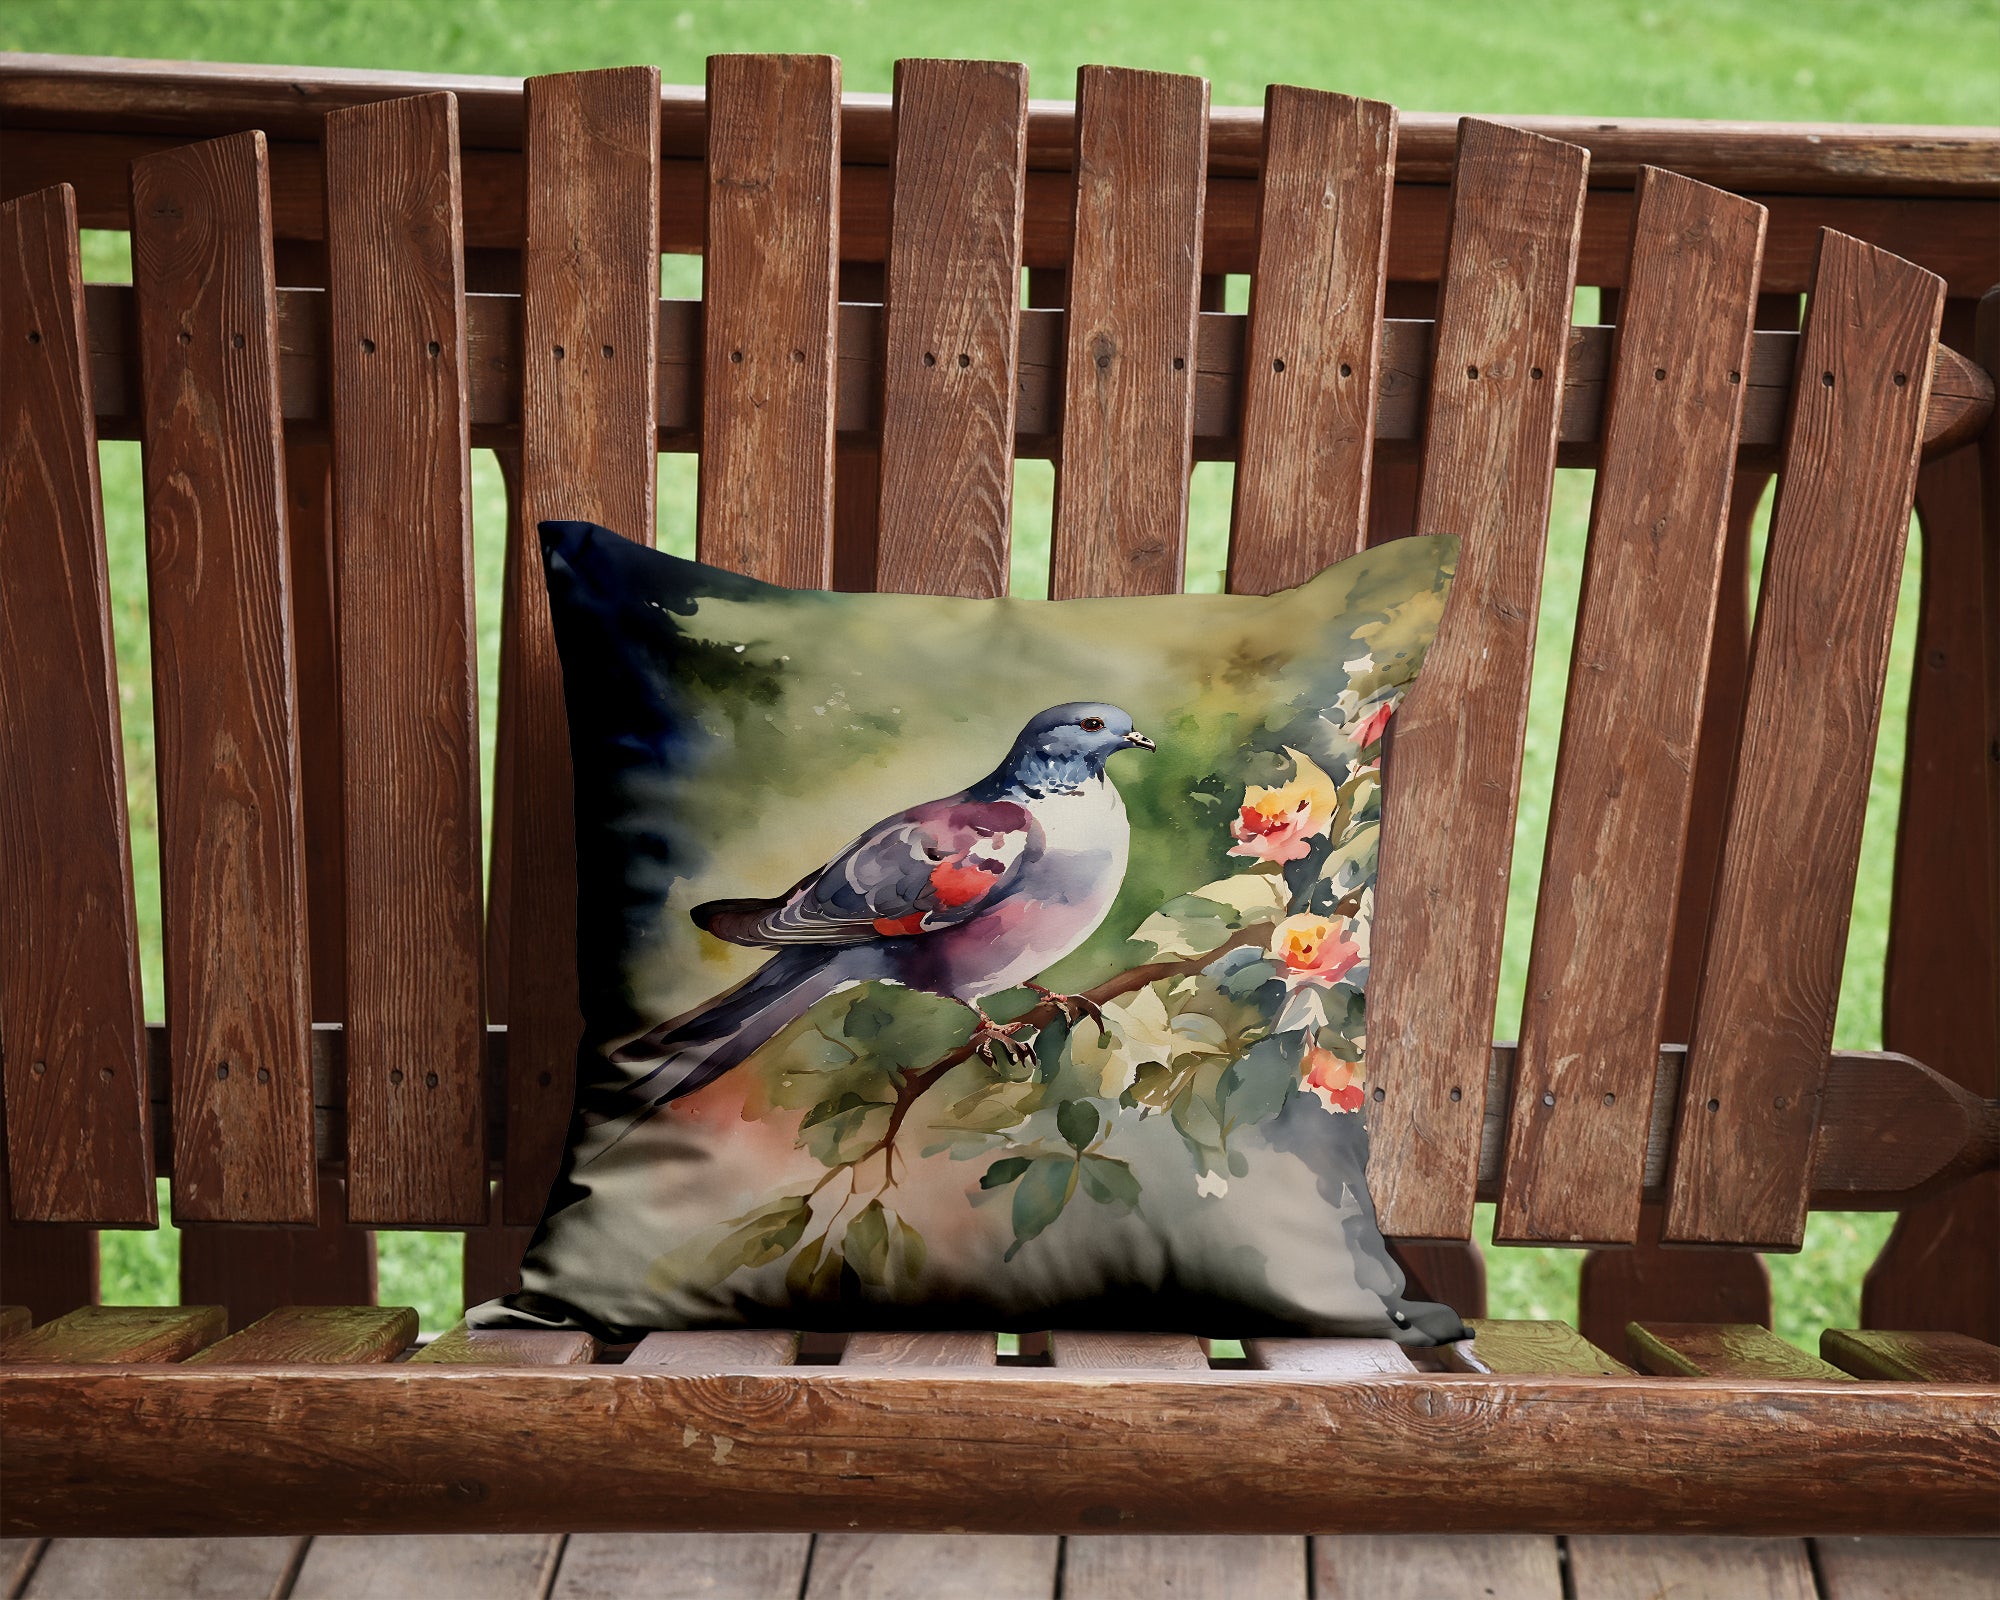 Buy this Pigeon Throw Pillow